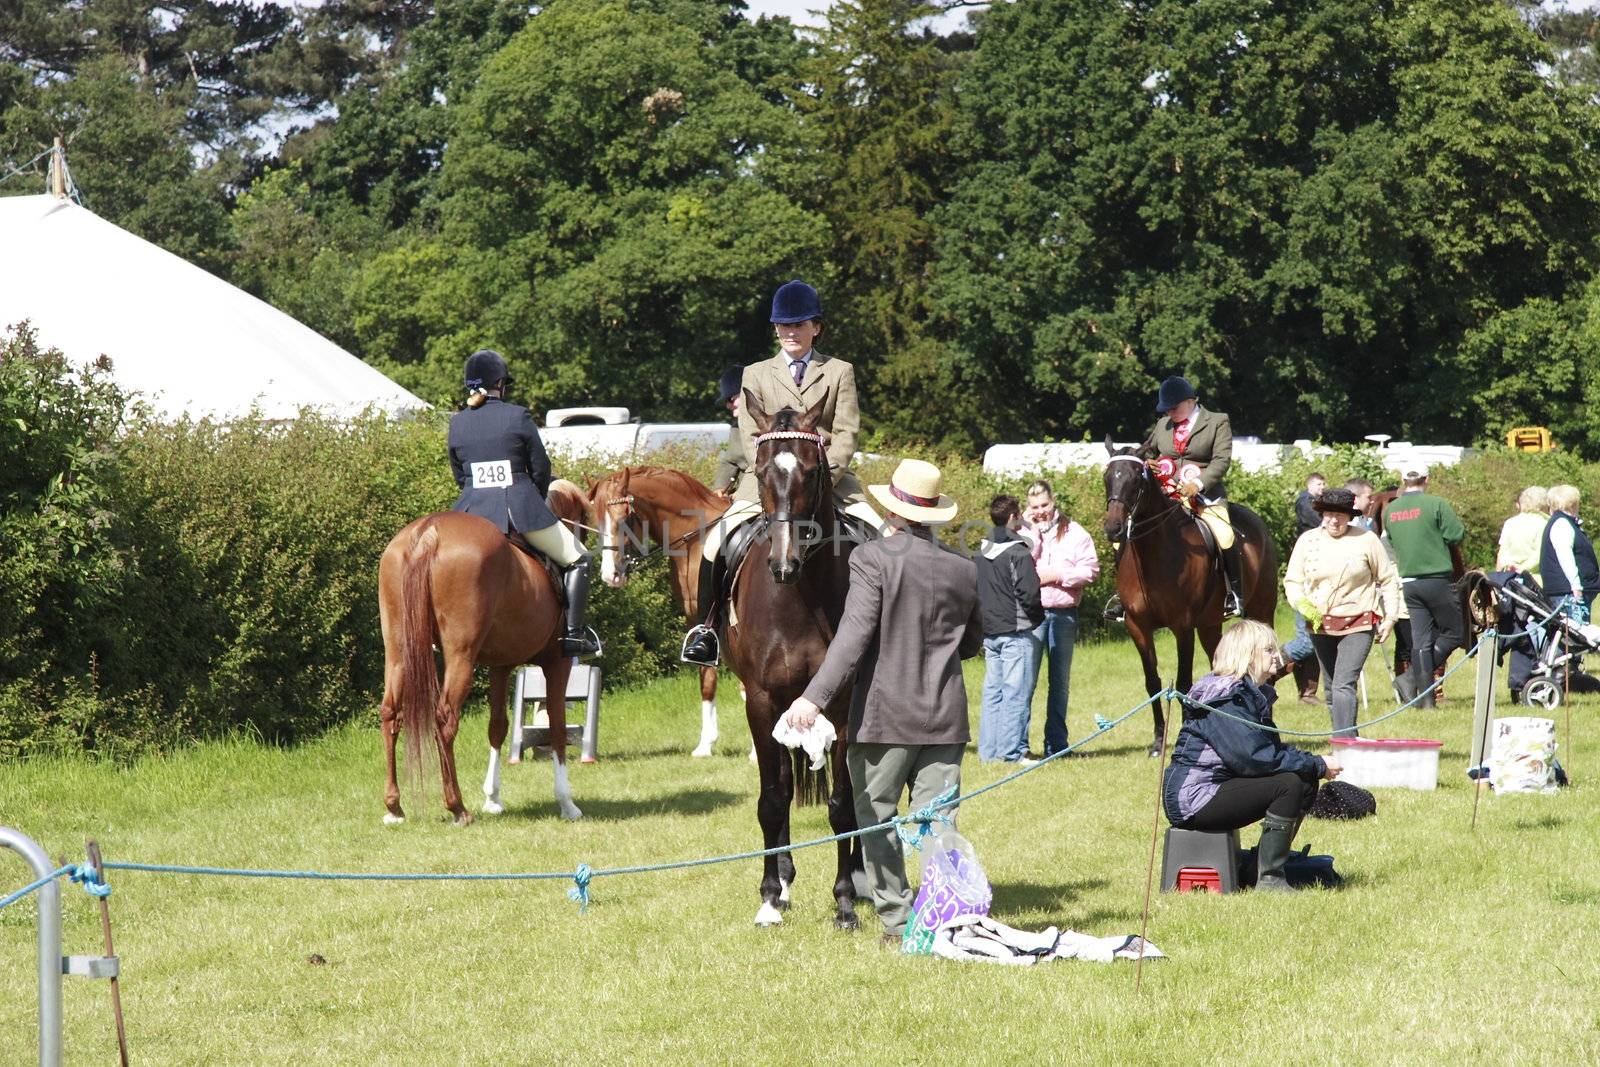 parading horses on show by leafy